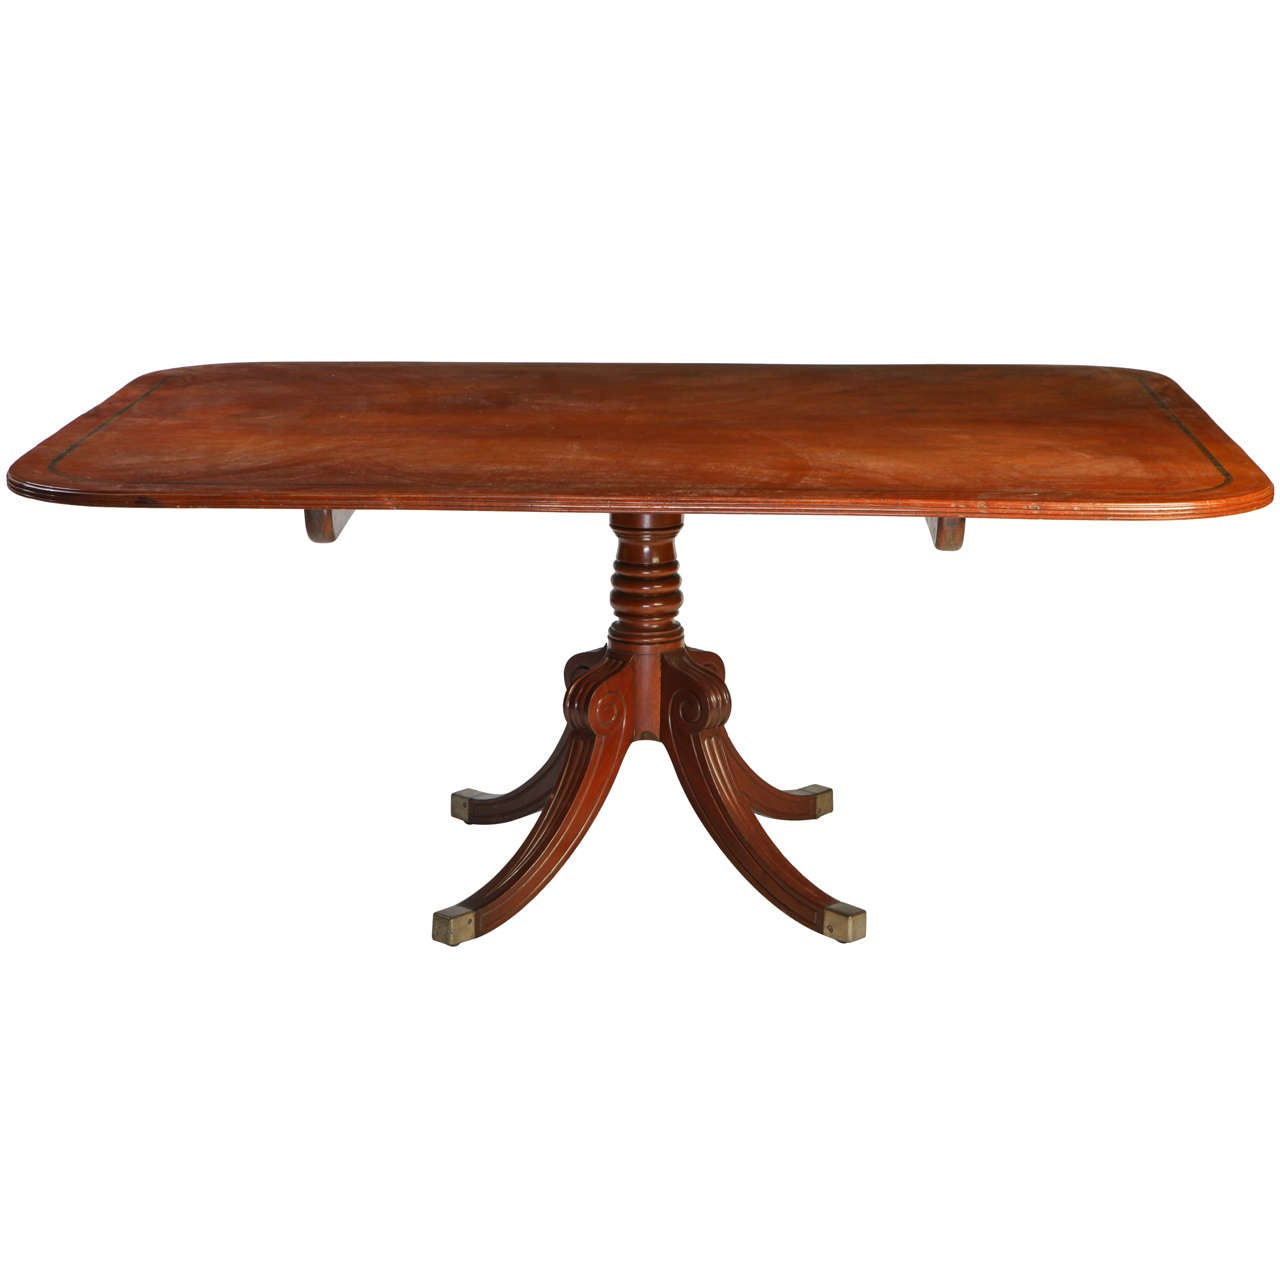 A Regency mahogany breakfast-table with rounded rectangular
crossbanded tilt-top above a ring turned spreading column and a quadripartite base, brass caps.
Measures: cm.180 x 125 x 76.